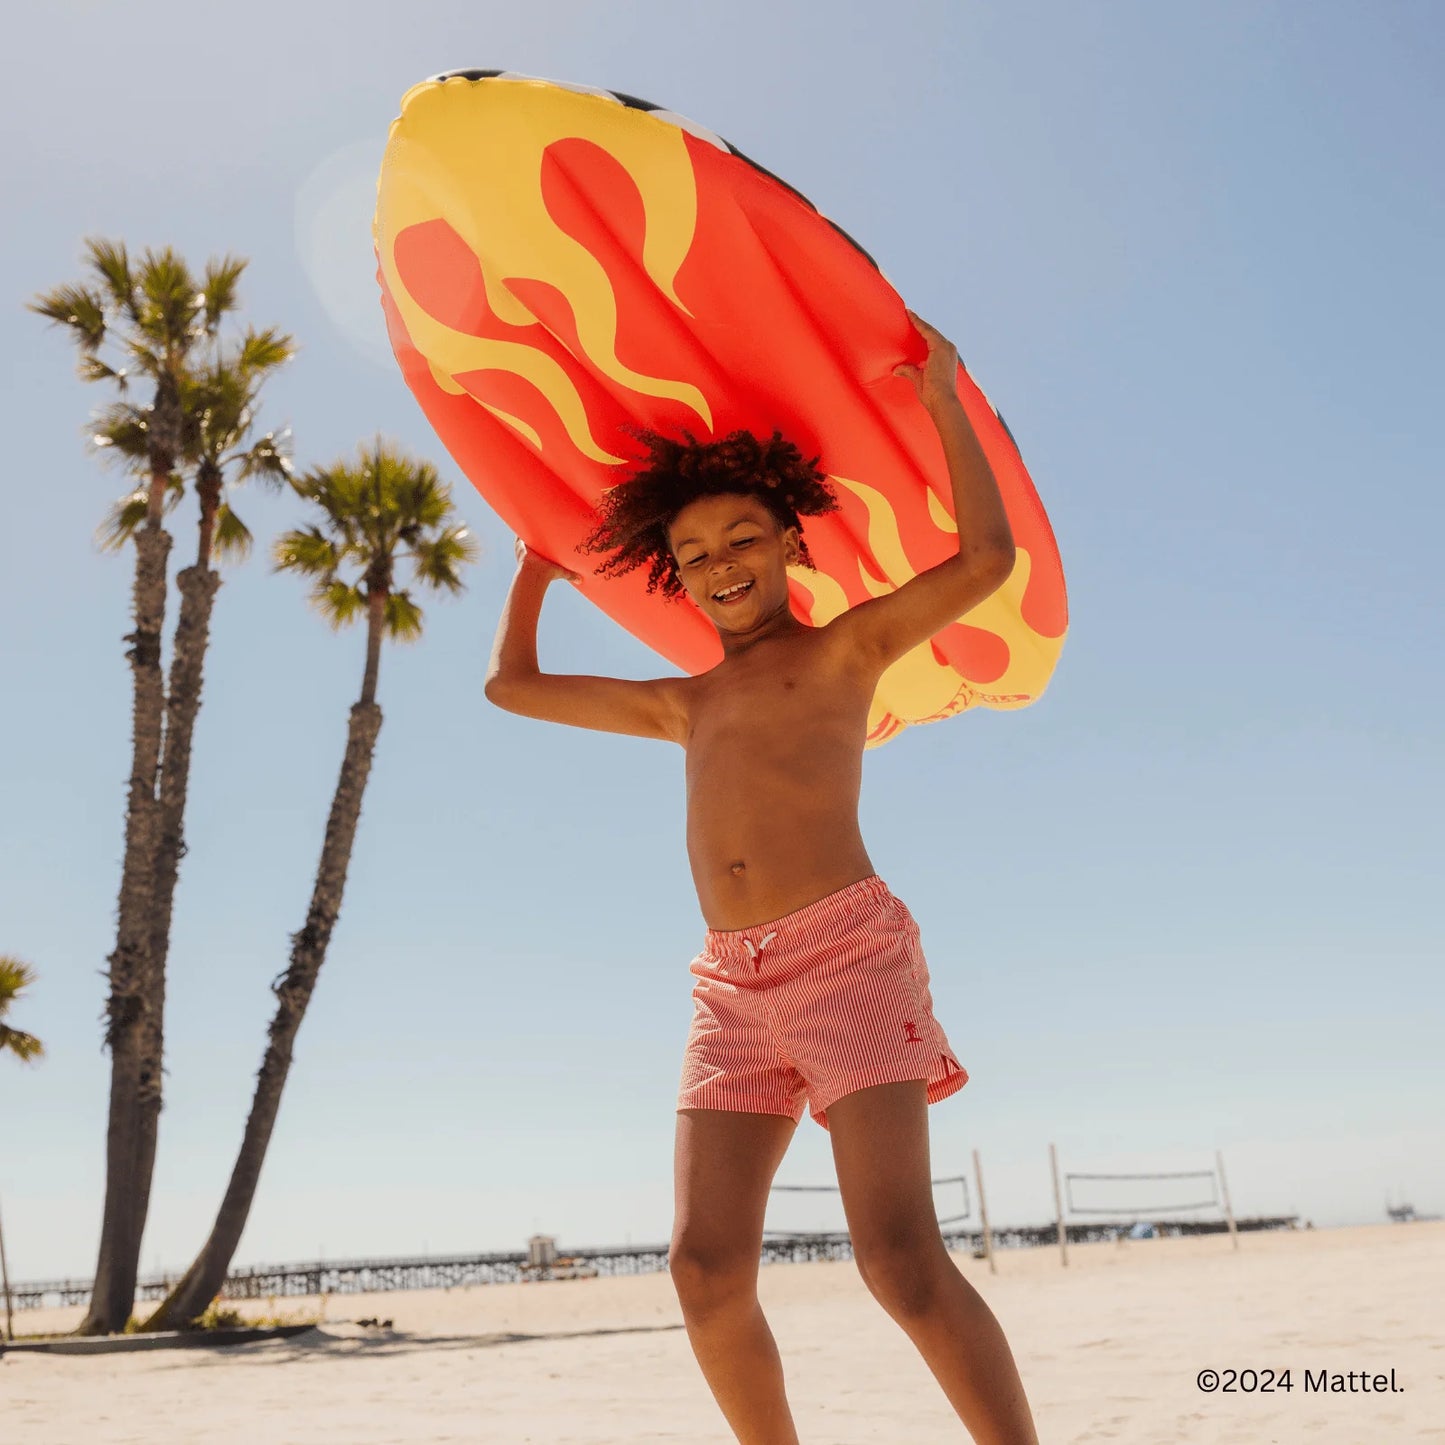 Hot Wheels Checkered Flame Surfboard (Reversible) Float